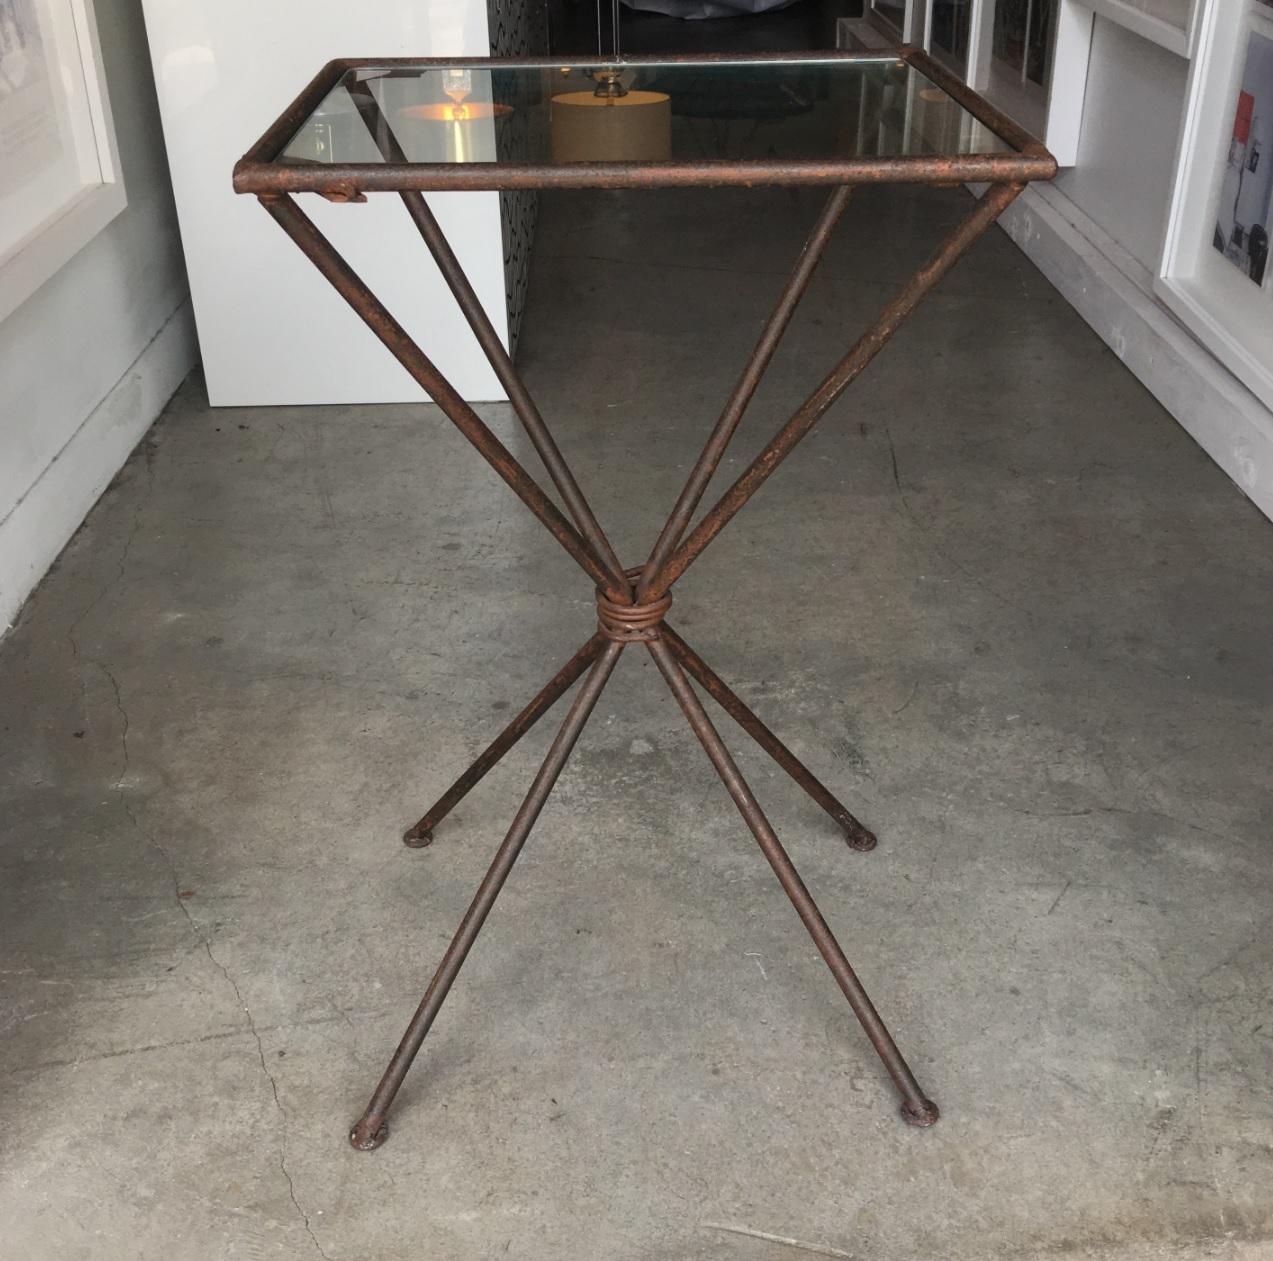 Great industrial side table hand welded of iron and has a glass top. The center has a roping cinched waist creating the flared legs. The table looks square however, it's a rectangle by 2 inches. The hand welding is visible in areas adding to its